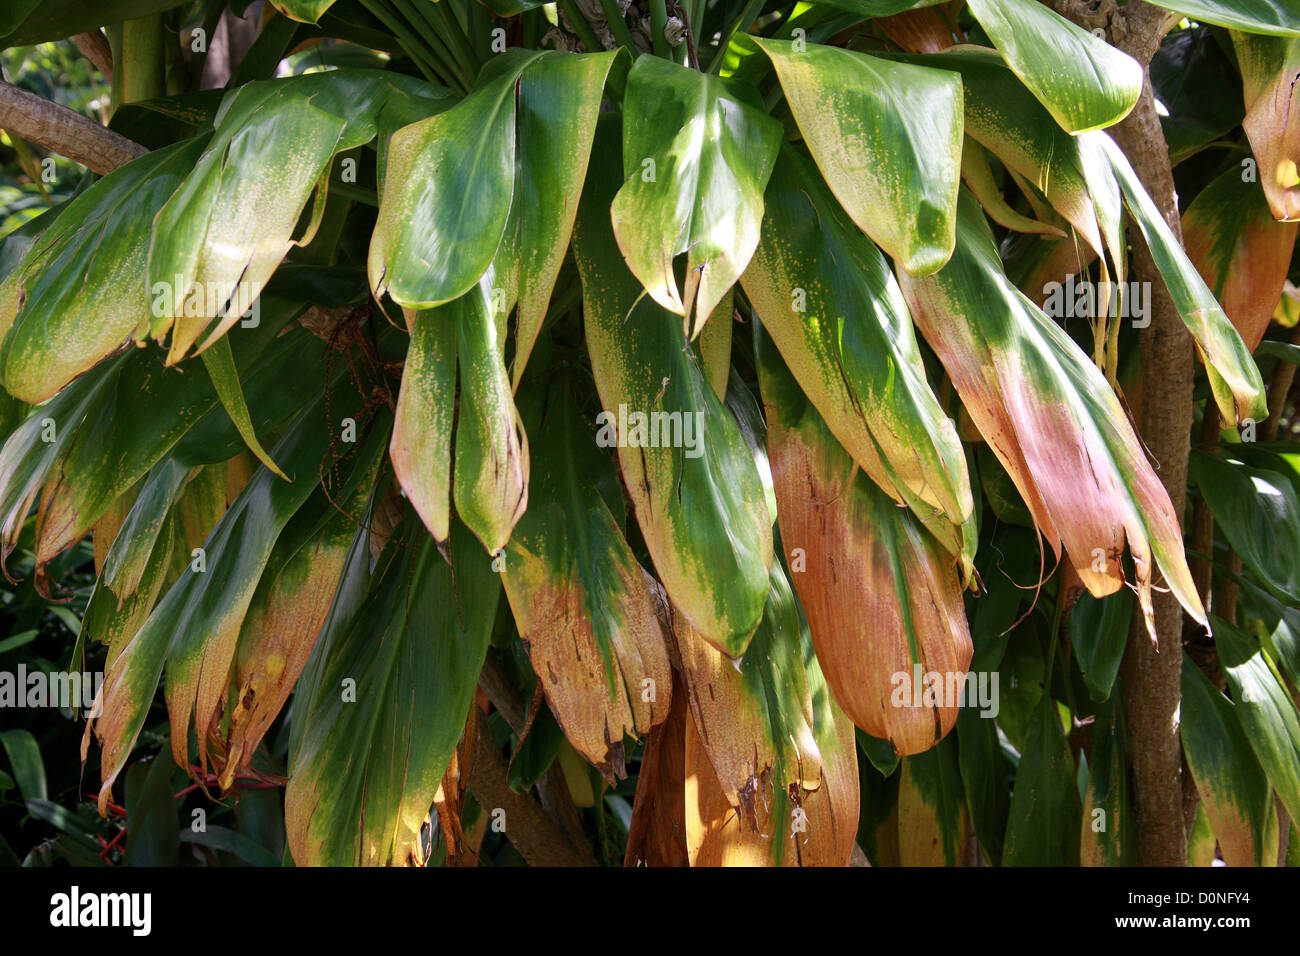 Cabbage Palm, Good Luck Plant, Palm Lily, Cordyline fruticosa, Asparagaceae (Agavaceae).  South East Asia, Australasia. Stock Photo